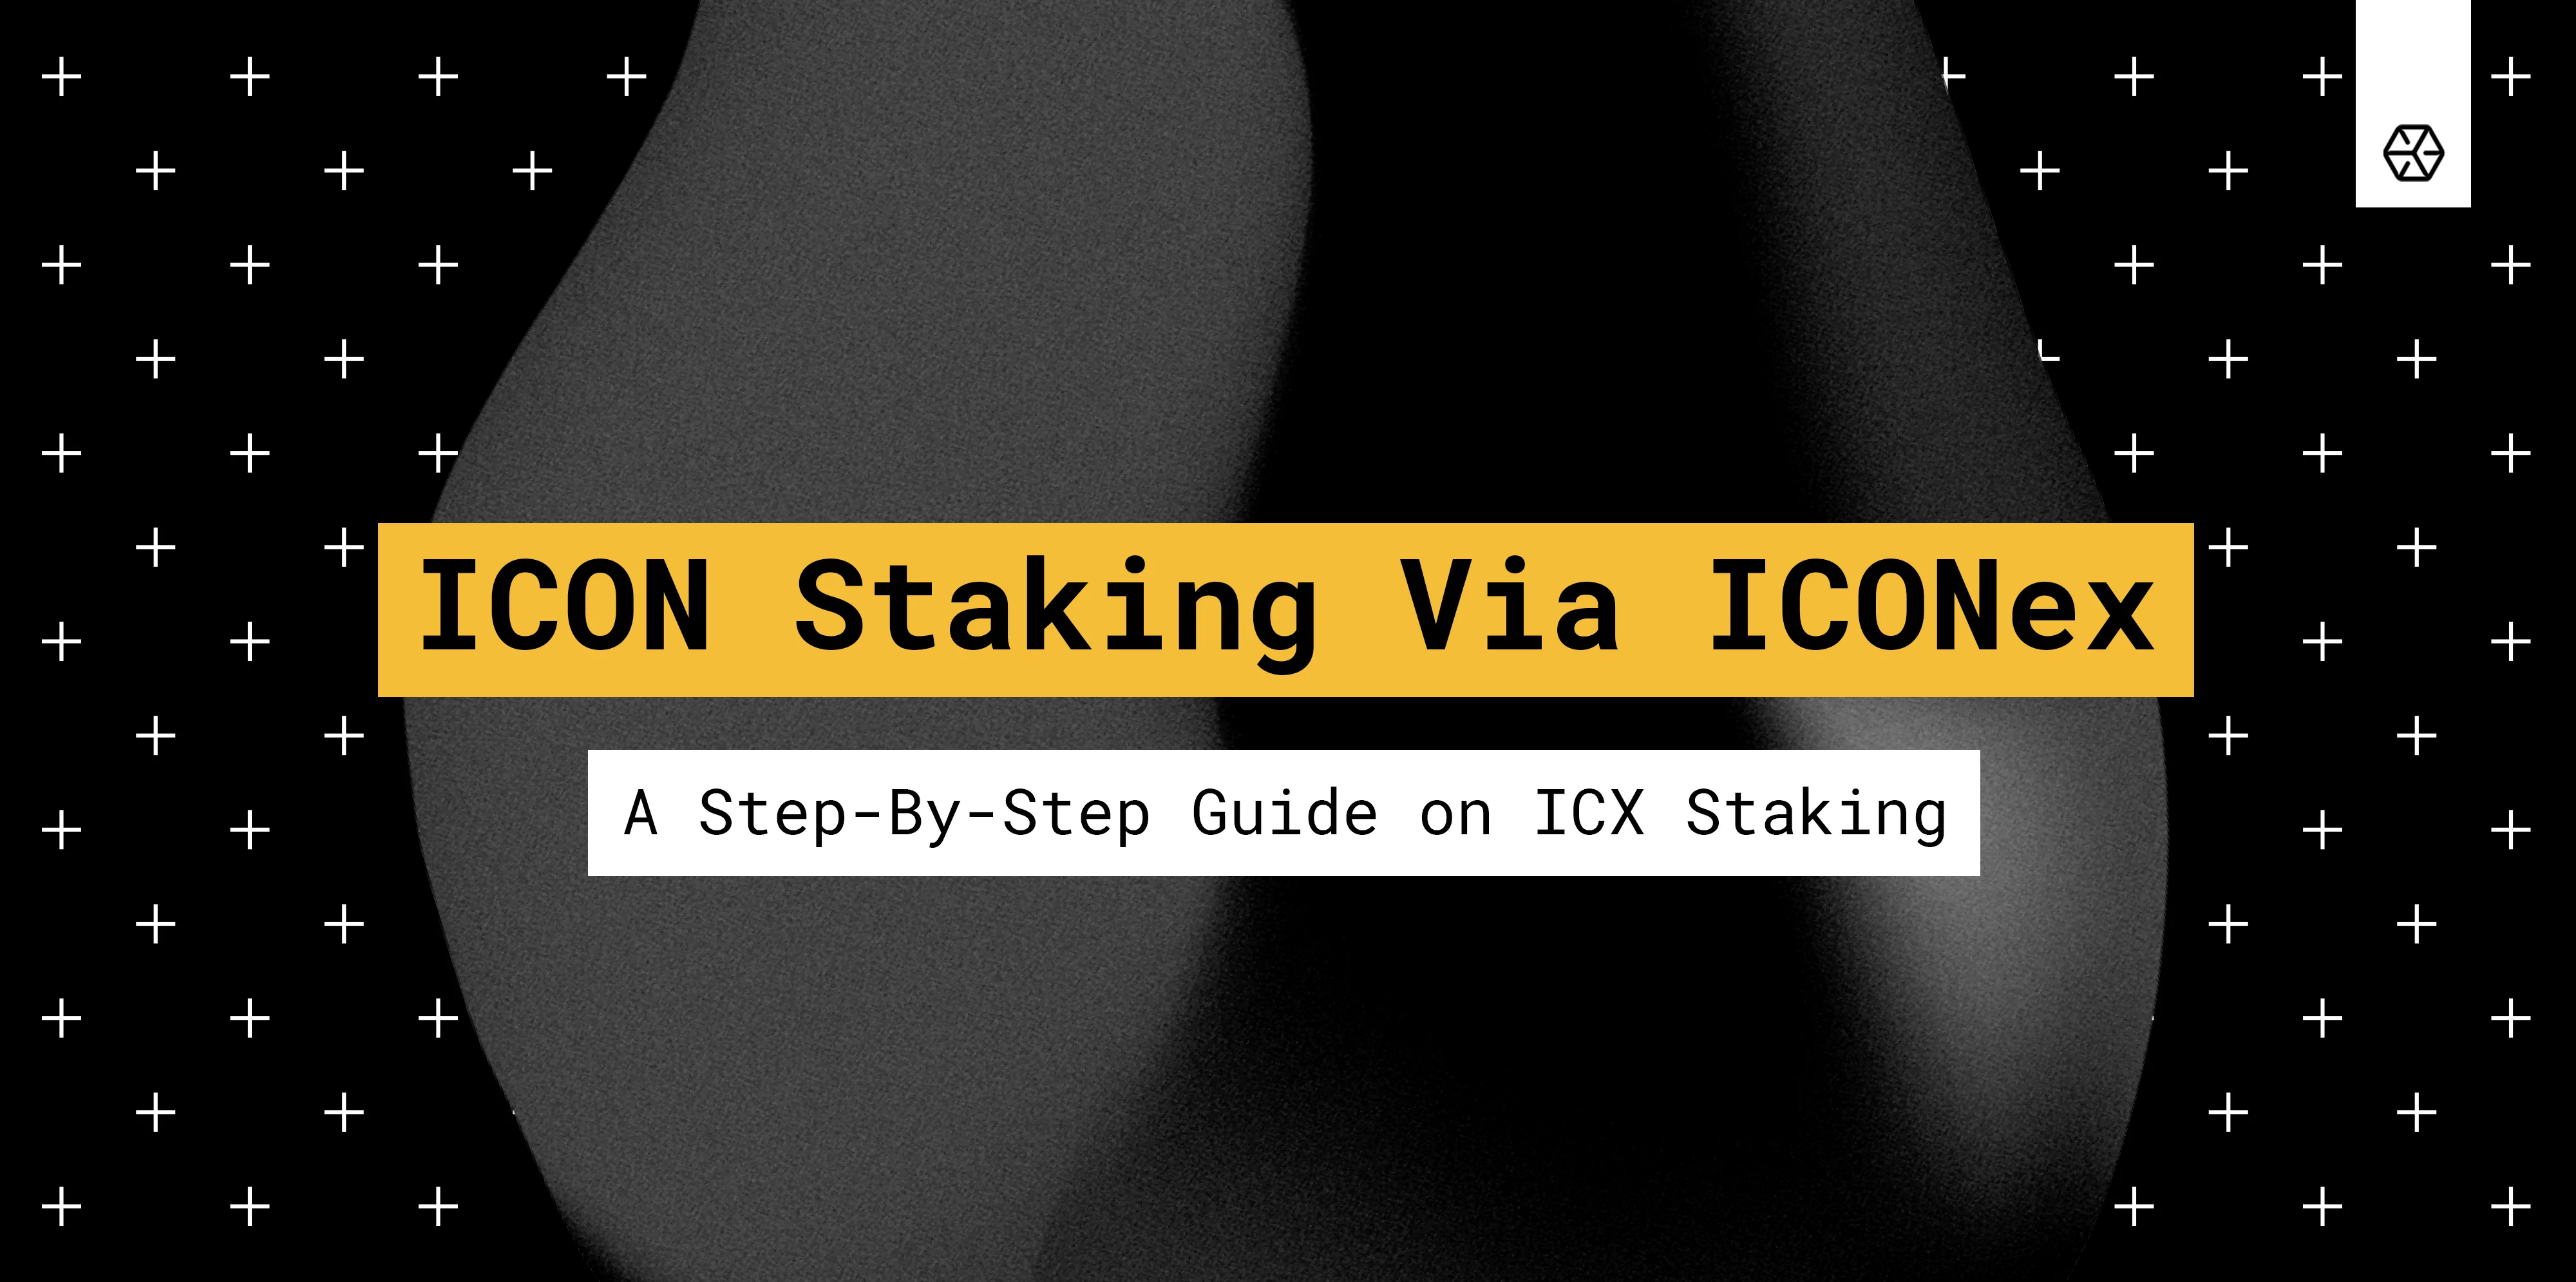 ICON Staking Guide Via ICONex: Staking Process Explained Simple